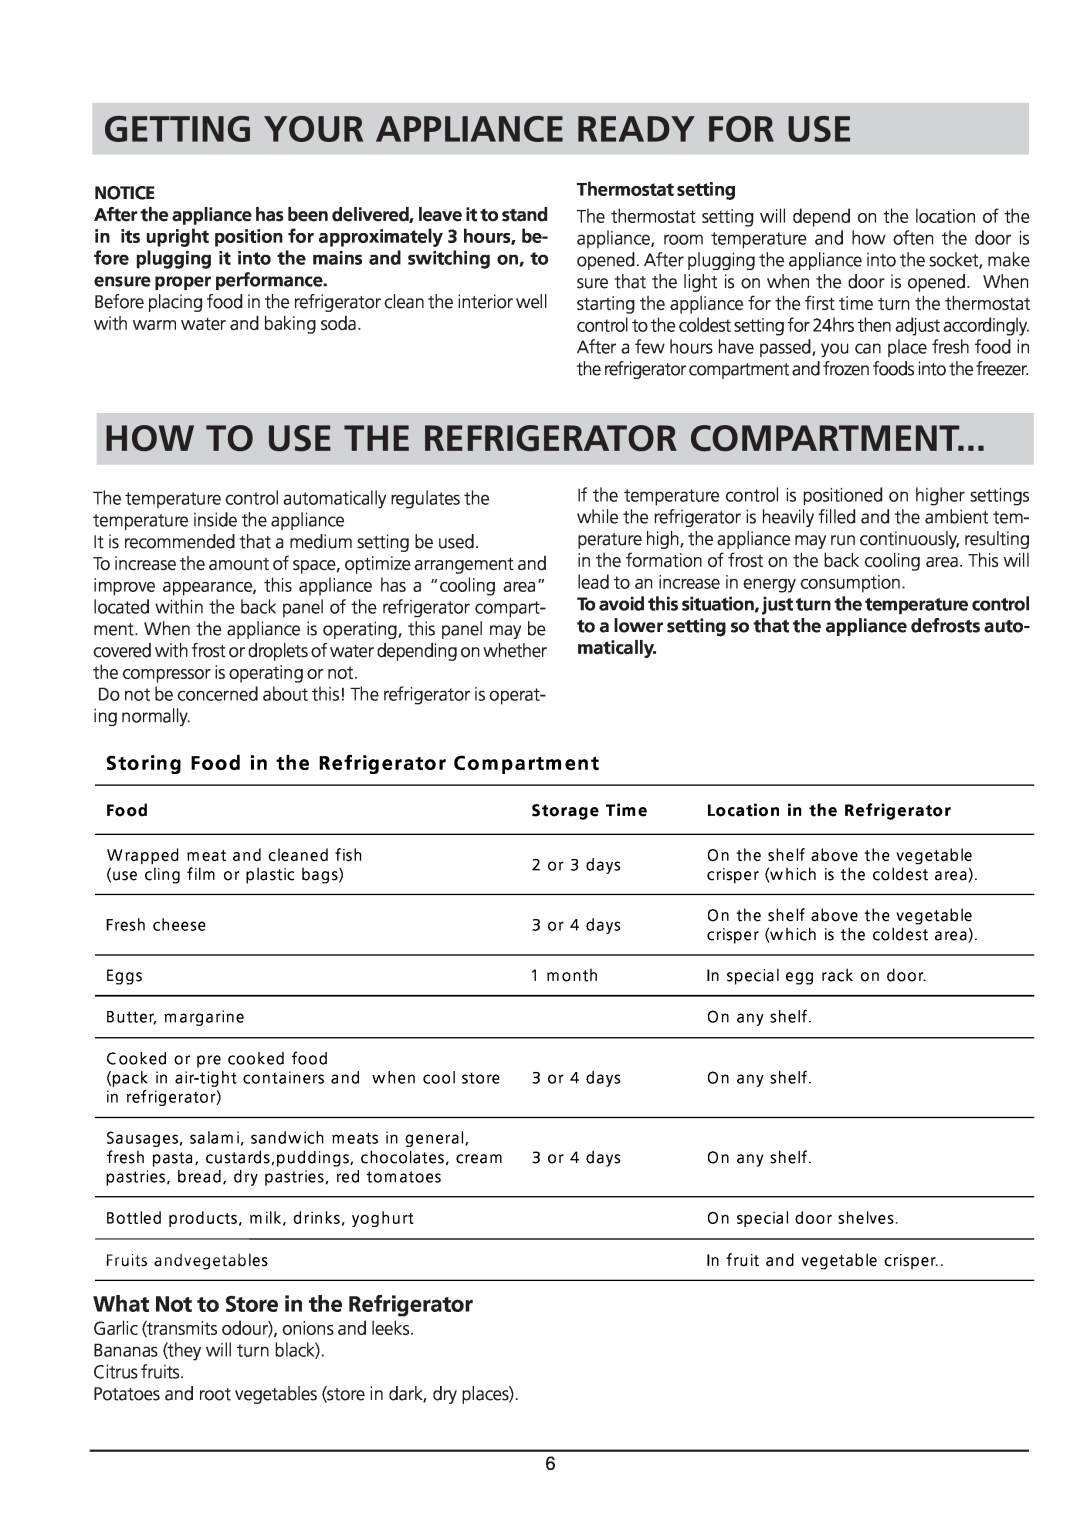 Hotpoint RSA 21 manual Getting Your Appliance Ready For Use, How To Use The Refrigerator Compartment, h T z, g w w 